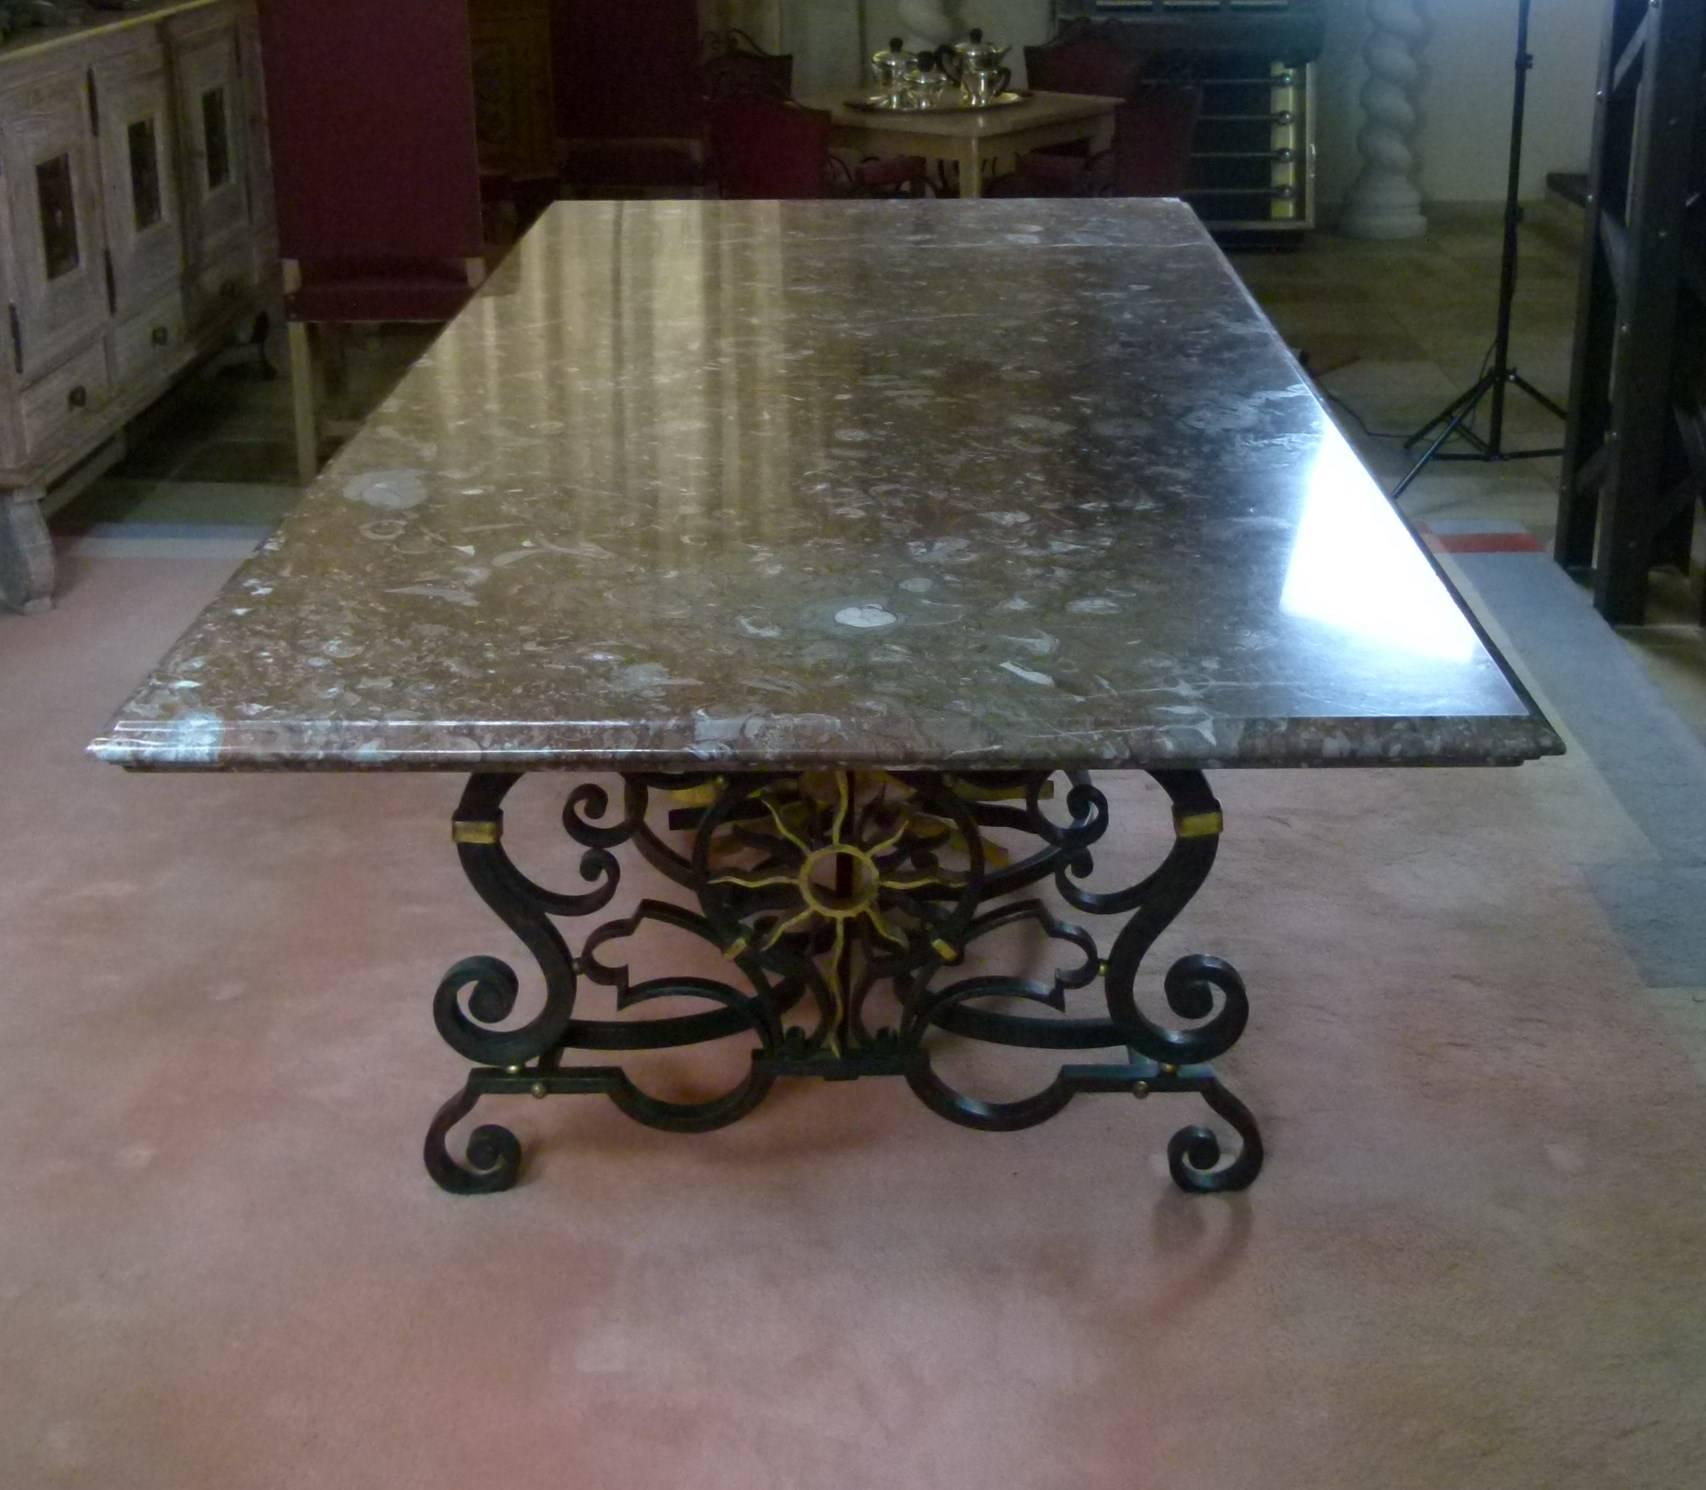 Large table made of a rectangular top in red marble of Belgium of 70 mm of thickness with a beak of corbin, resting on a forged and beaten iron frame. Work done with hot hammering without any welds entirely mounted with screws.
Metal patina and